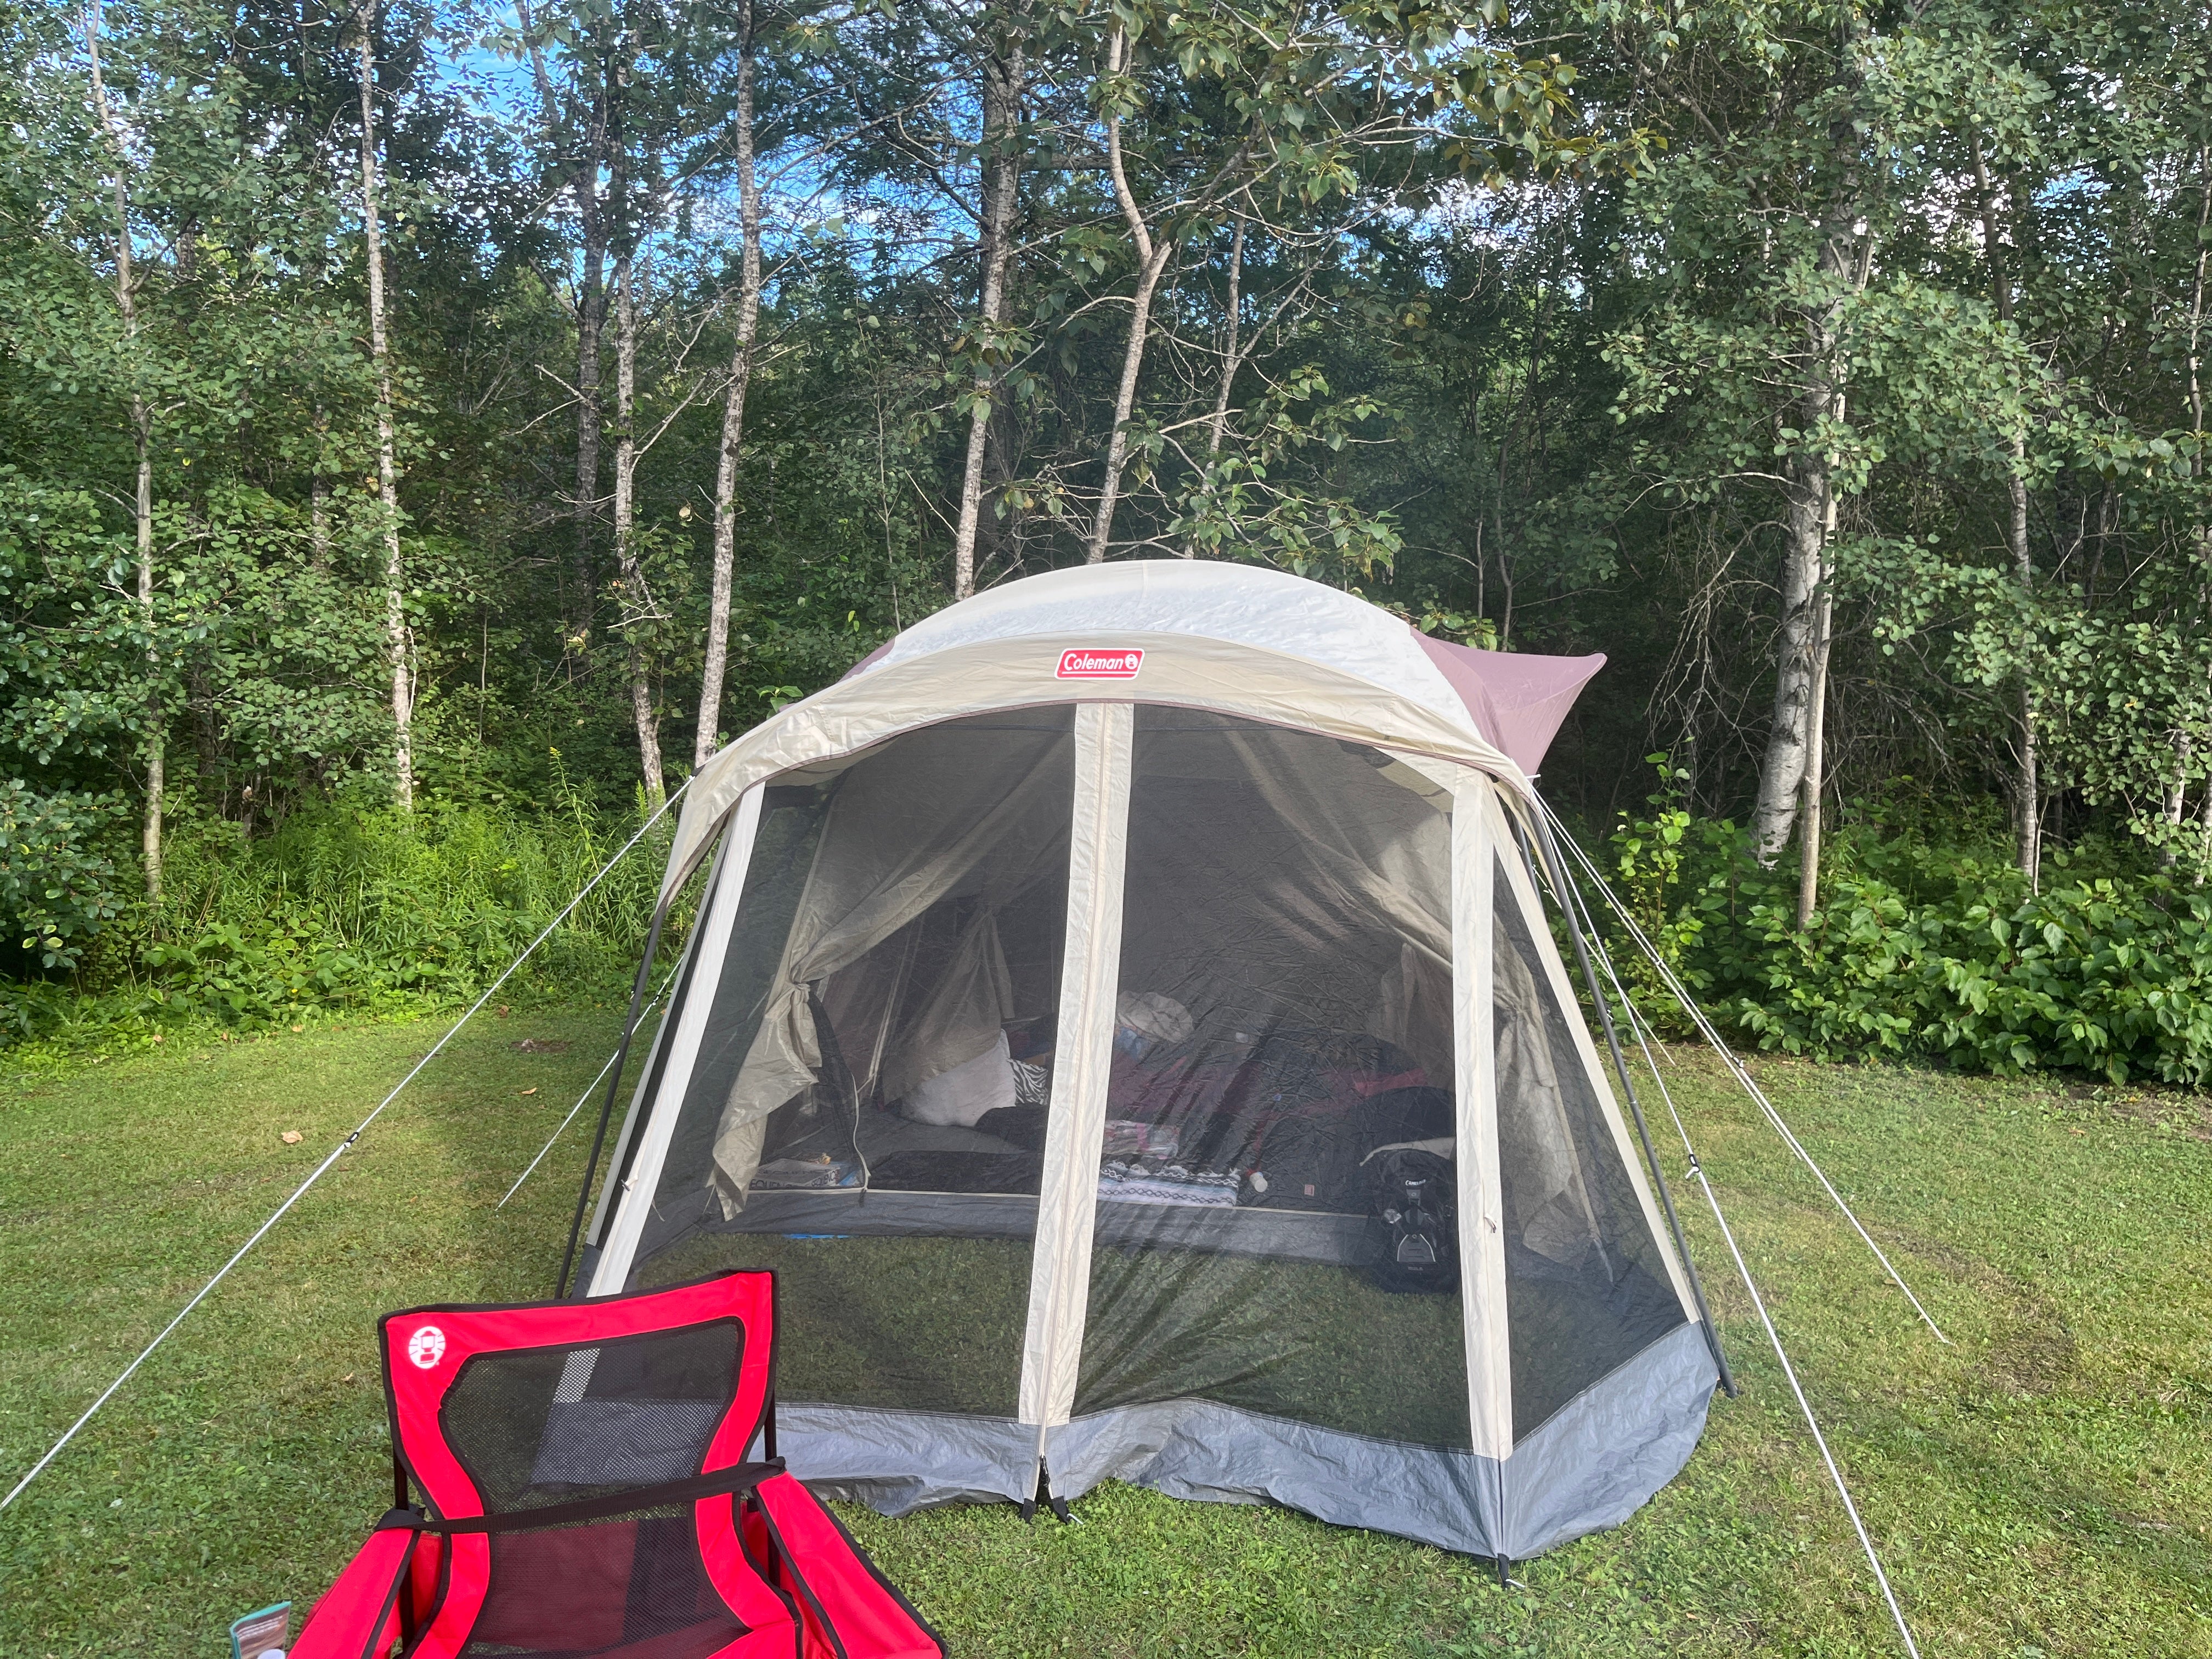 Camper submitted image from Houlton/Canandian Border KOA - 1